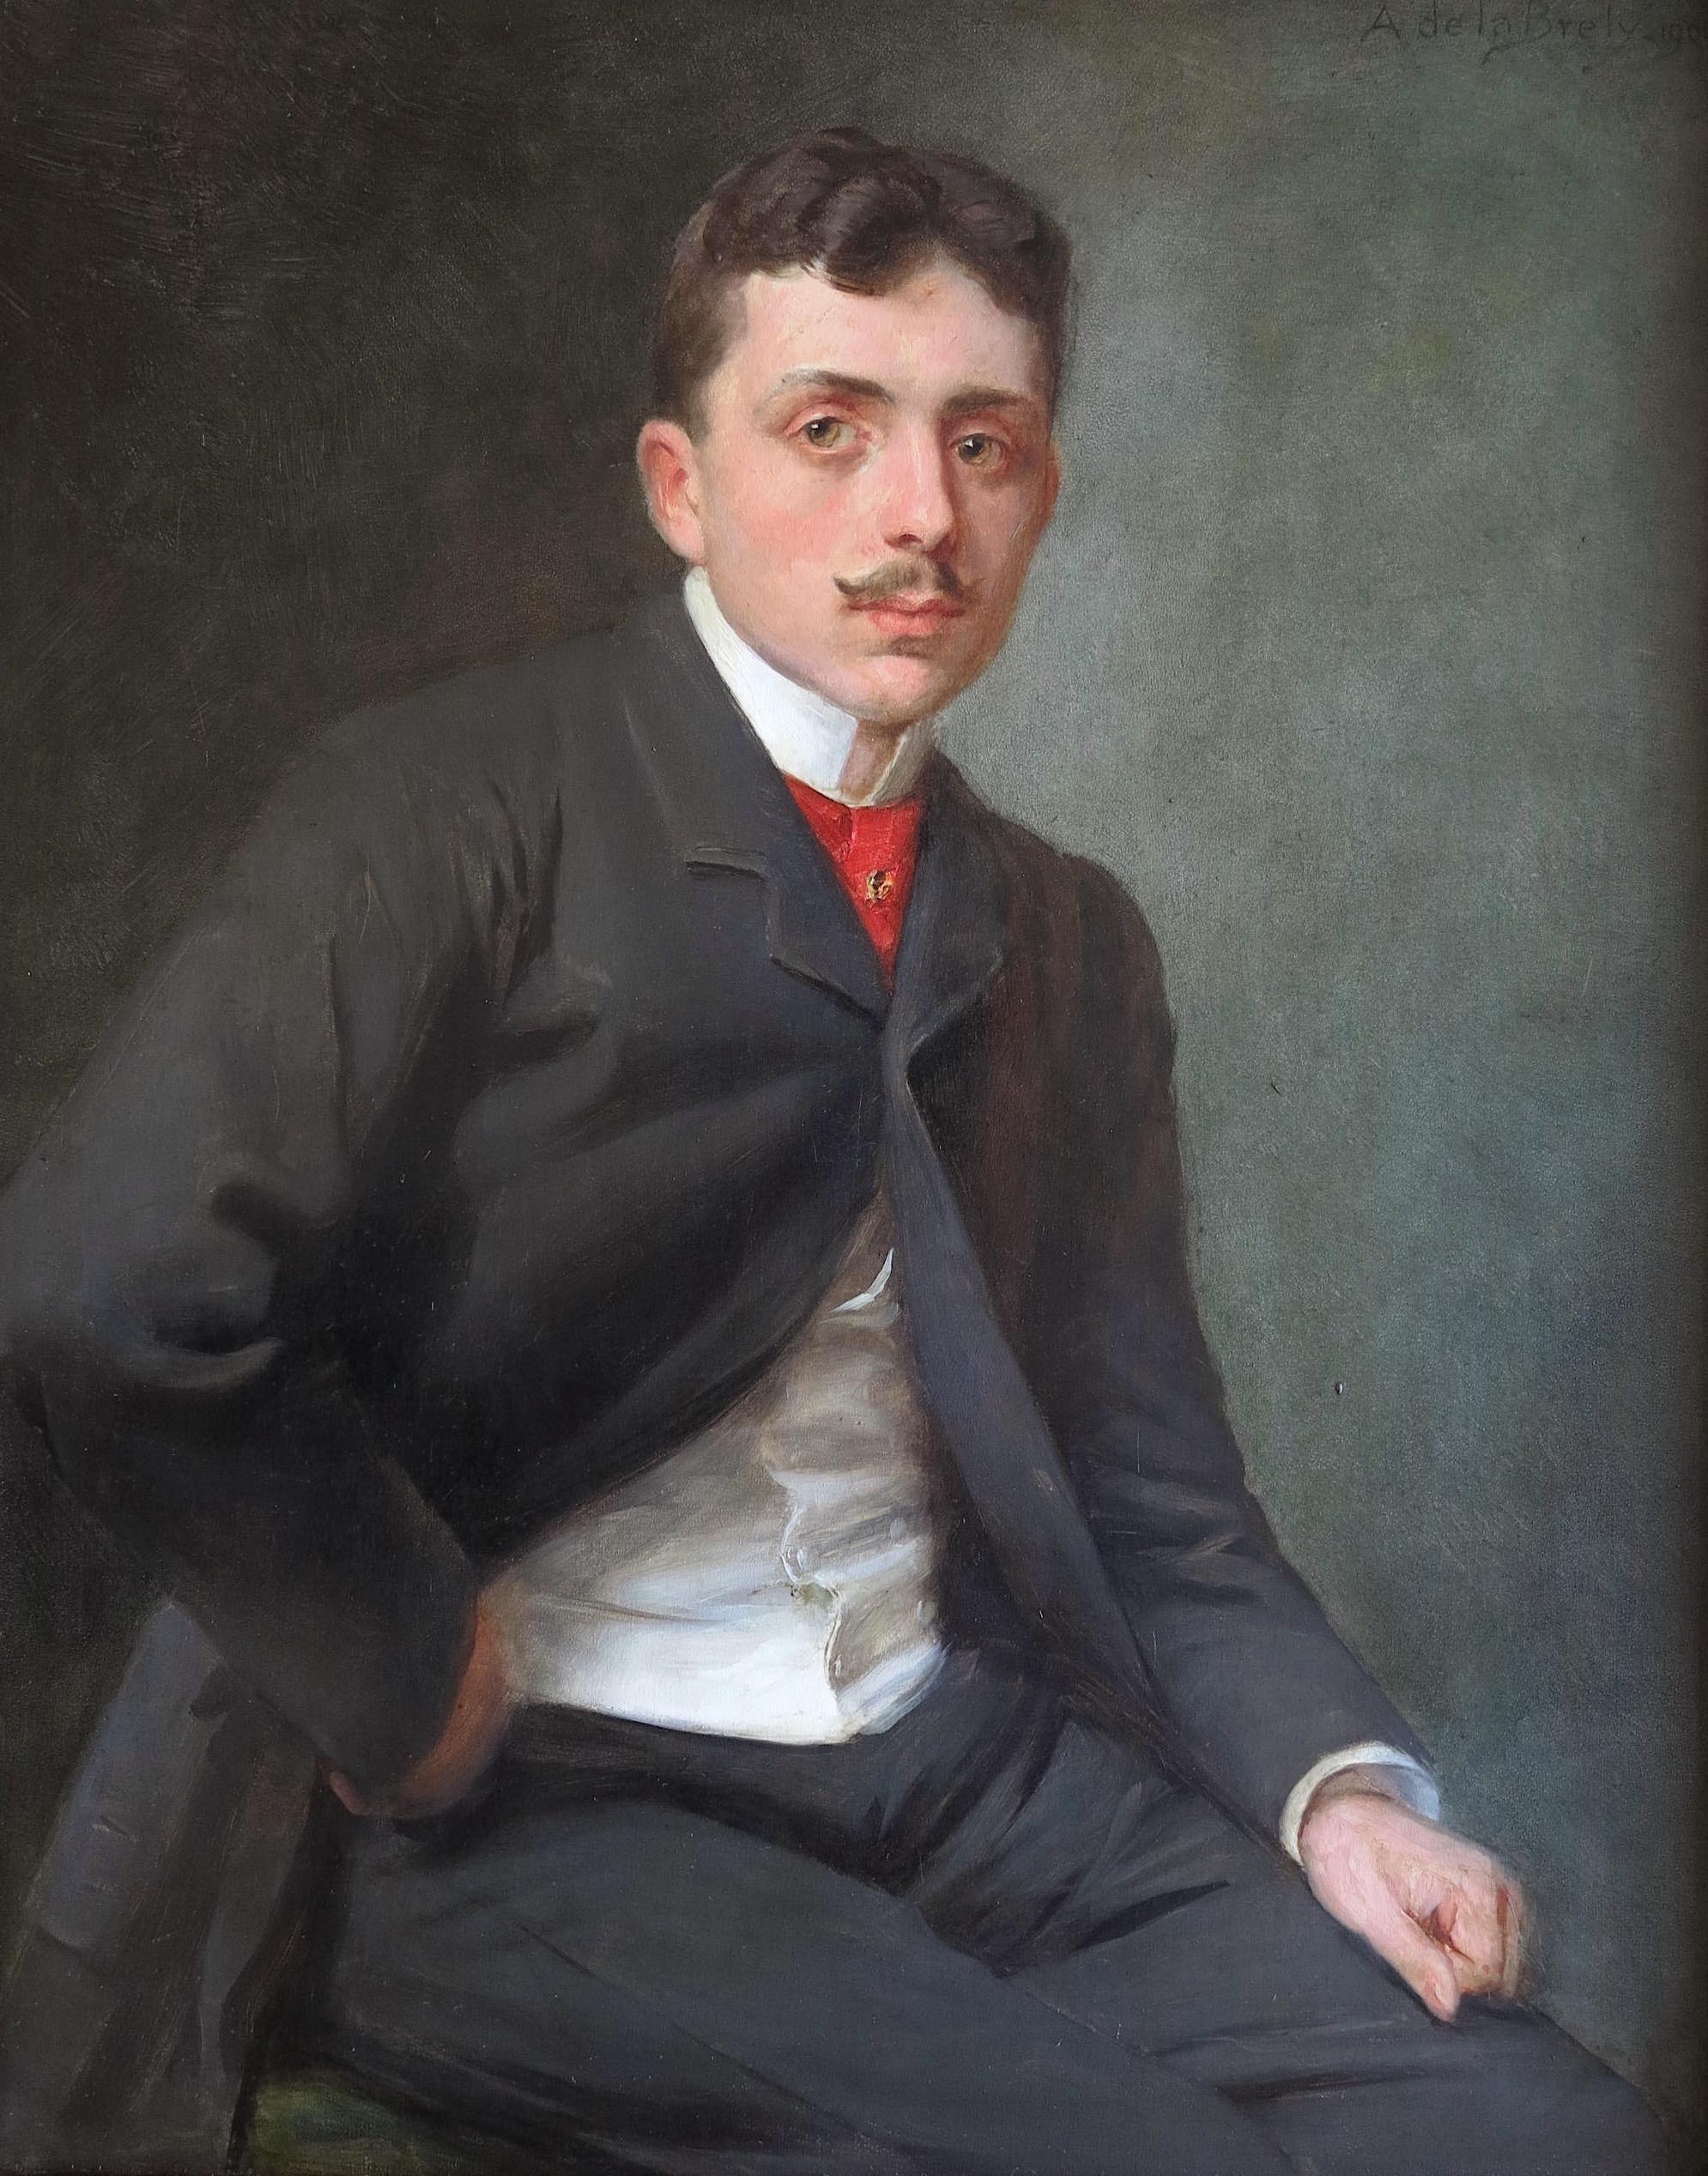 Portrait of young man sitting - Painting by Auguste Joseph GIRARD de La BRELY